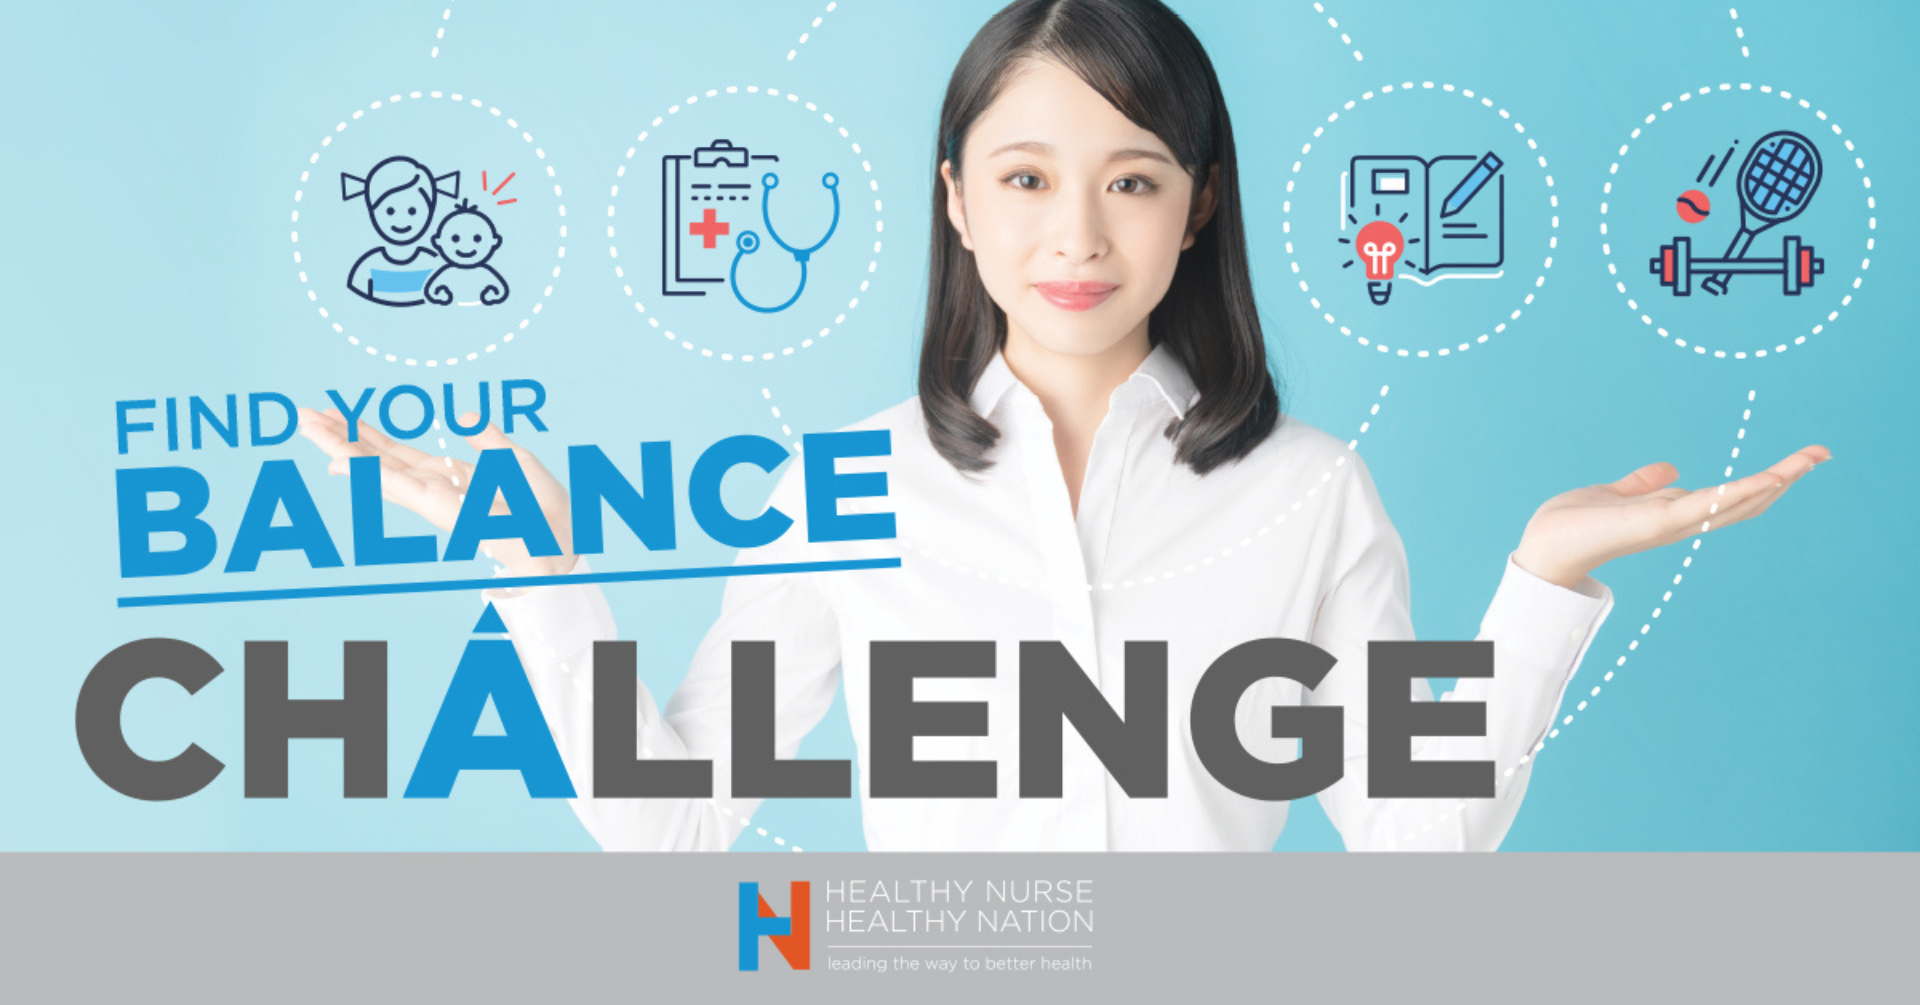 Optimize Time at Home - Healthy Nurse, Healthy Nation - Find Your Balance challenge - Day 5 4644